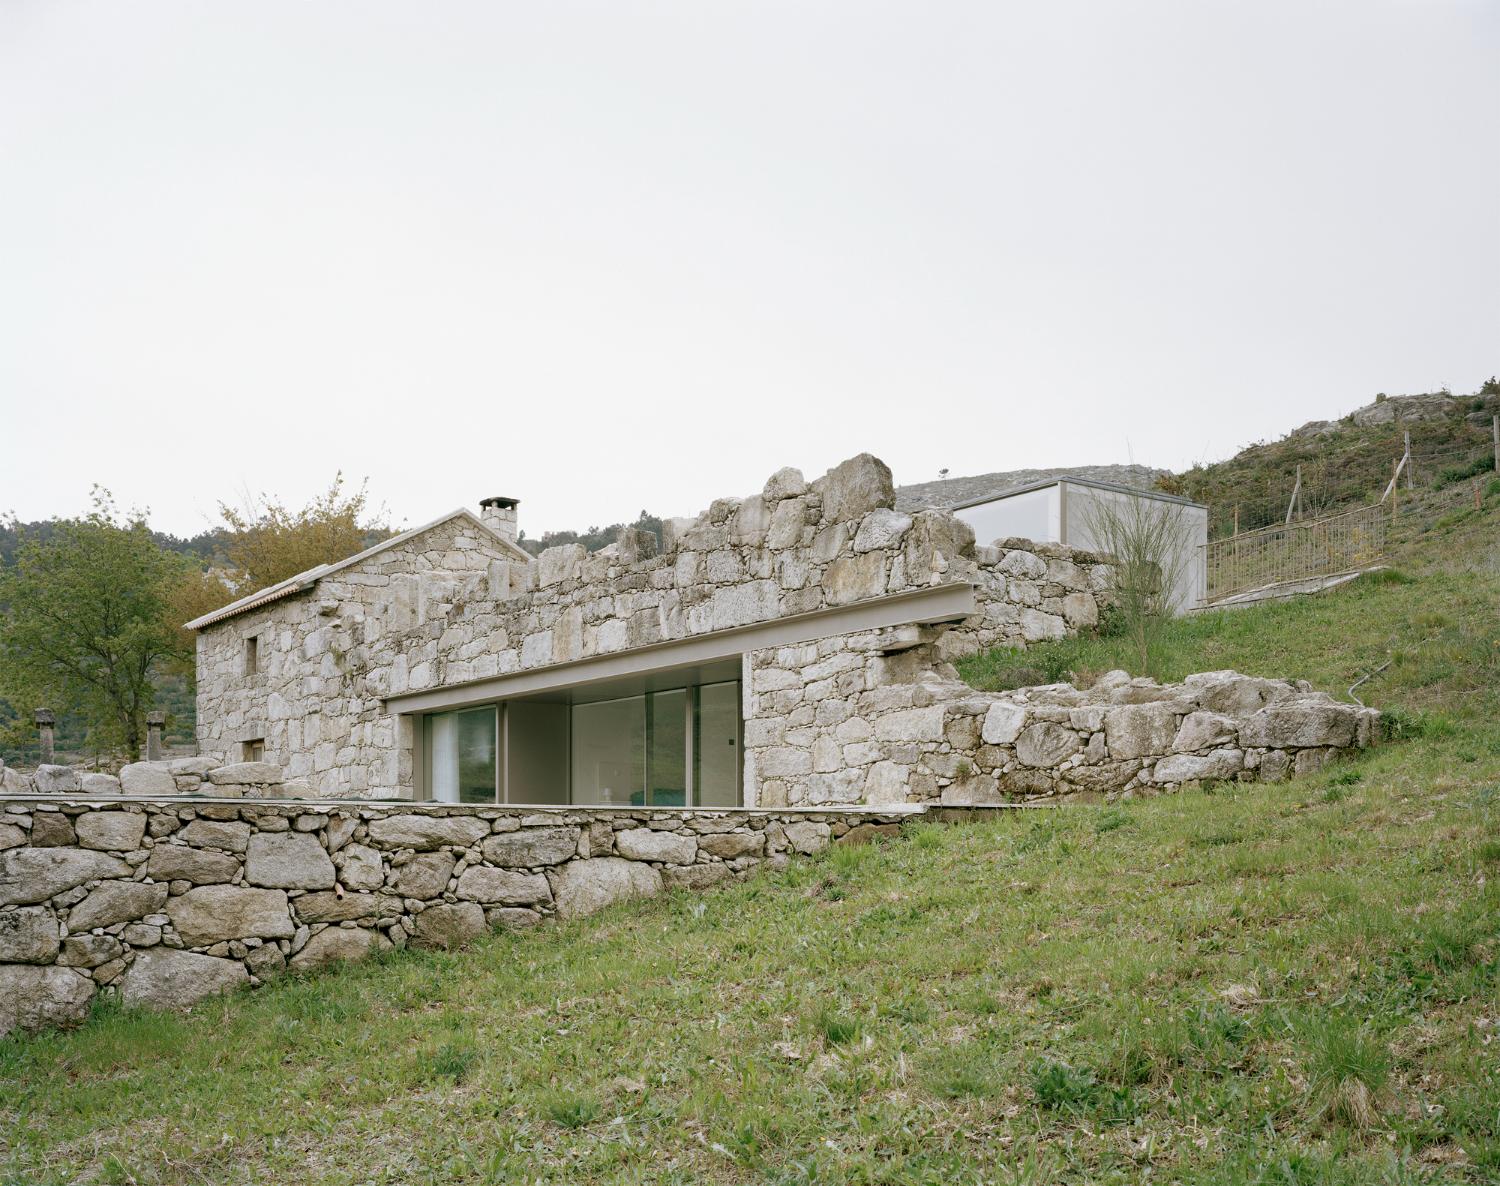 Contemporary Transformation of a Stone House Ruins in the Nothern Portugal by Nuno Brandao Costa